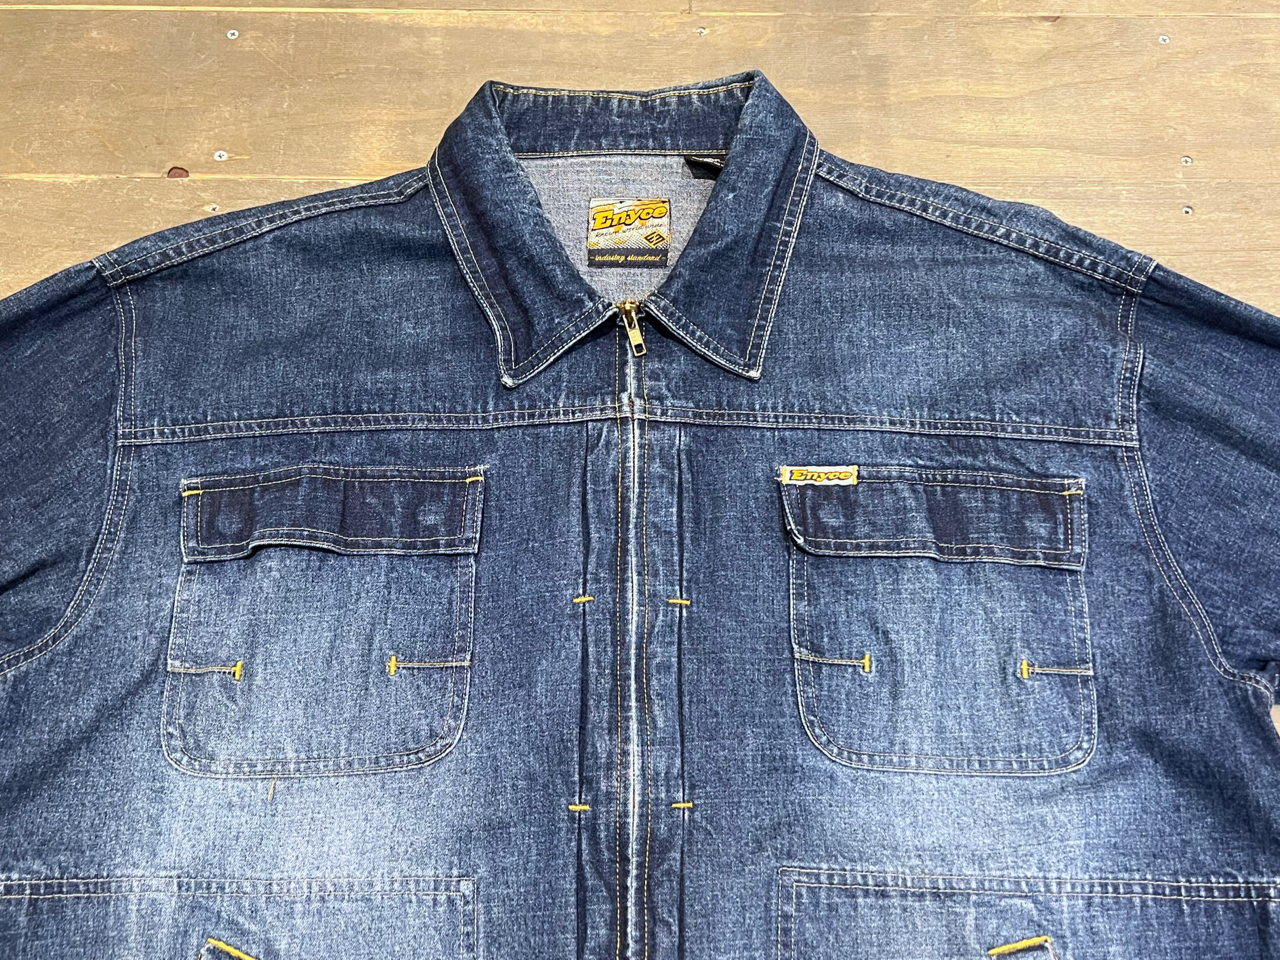 BUSINESS AS USUAL / 00s Enyce Oversized Zip-up Denim Jacket